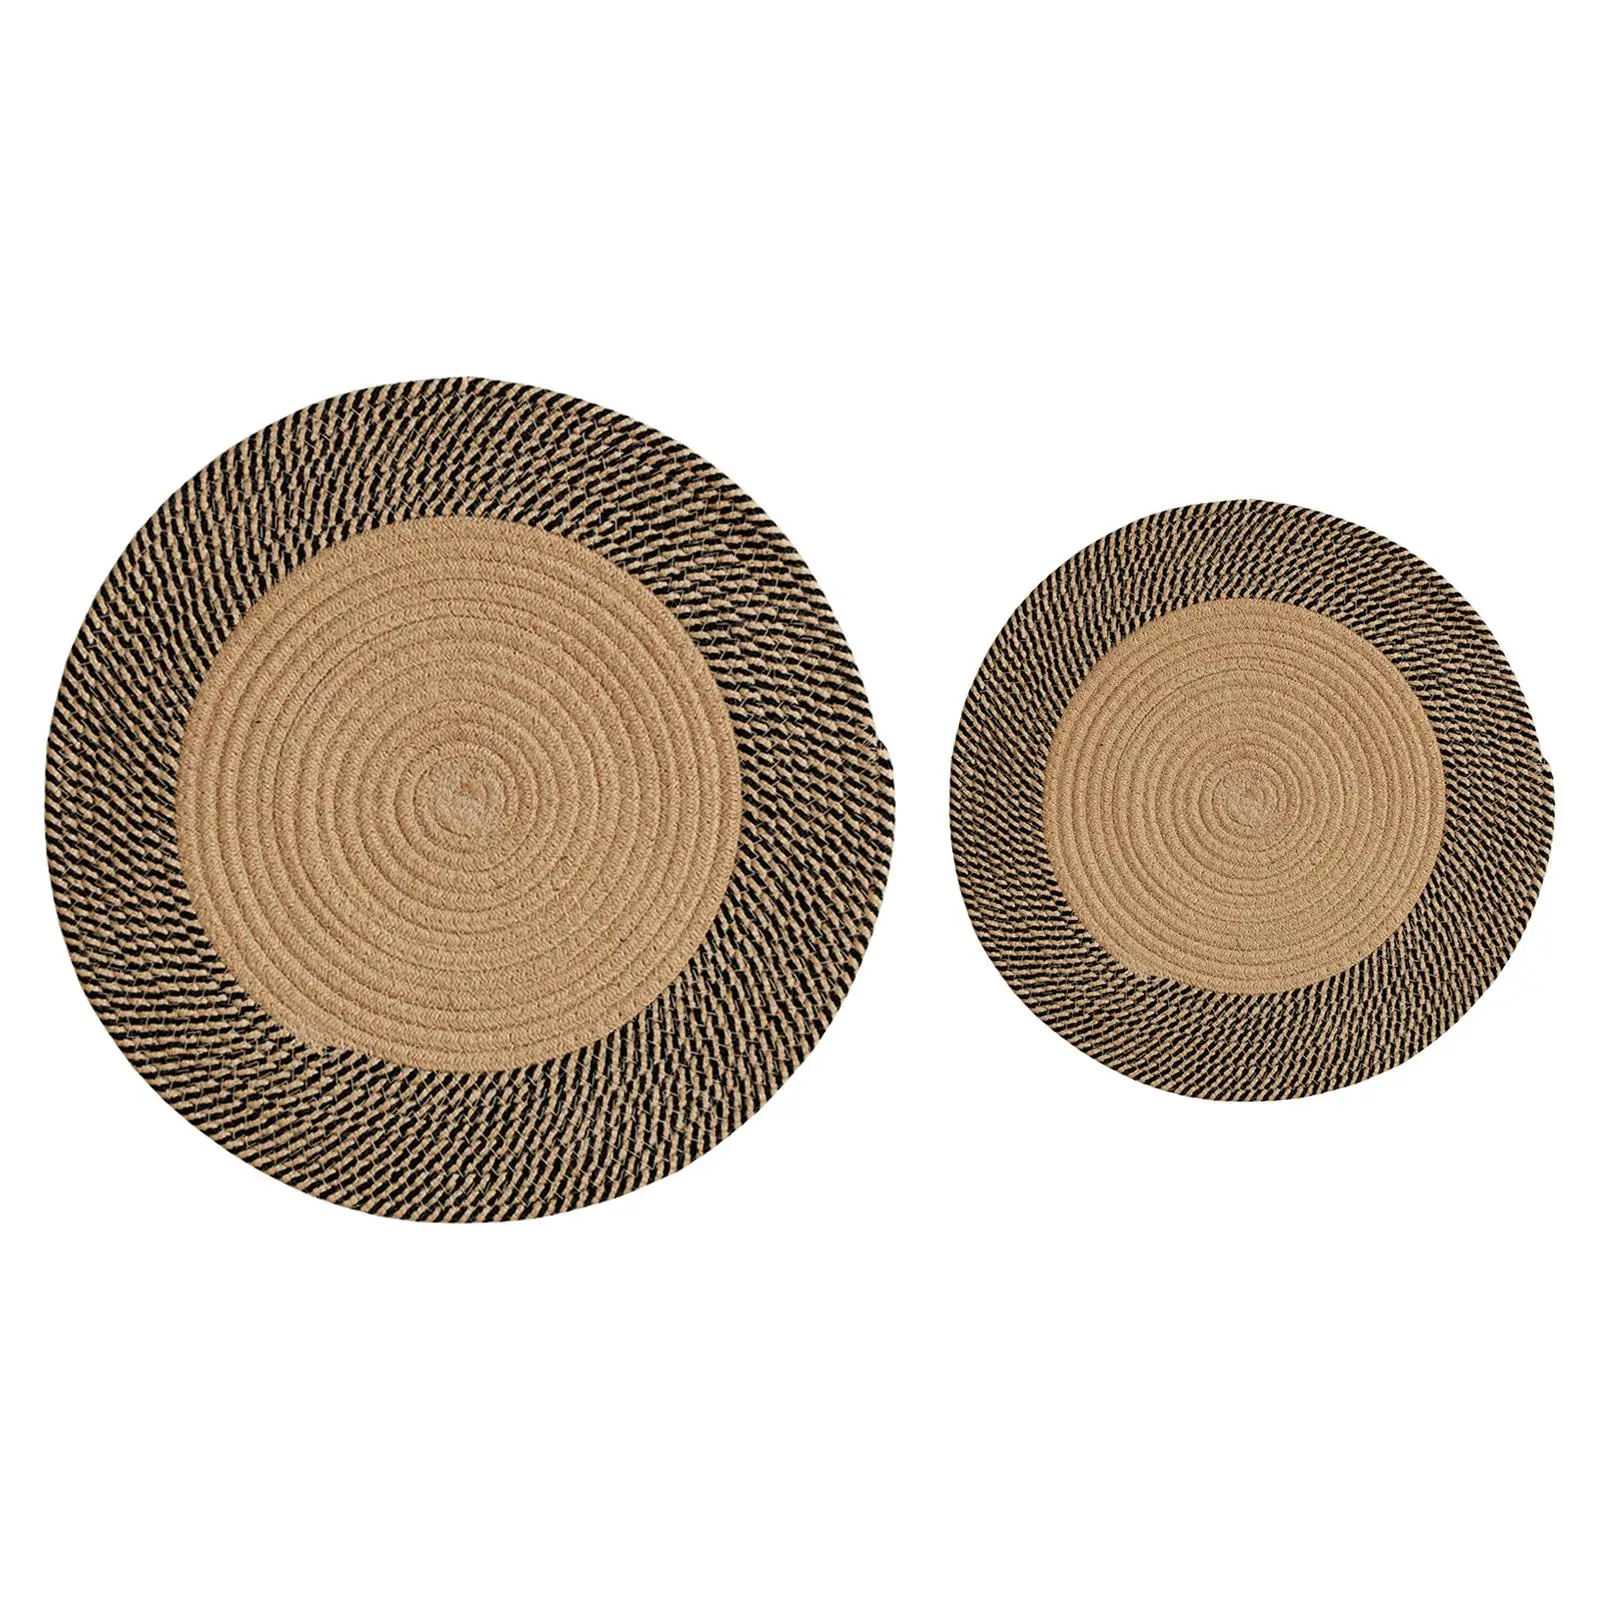 Round Handwoven Natural Jute Braided Rug Farmhouse Rug Reversible Area Rugs for Living Room